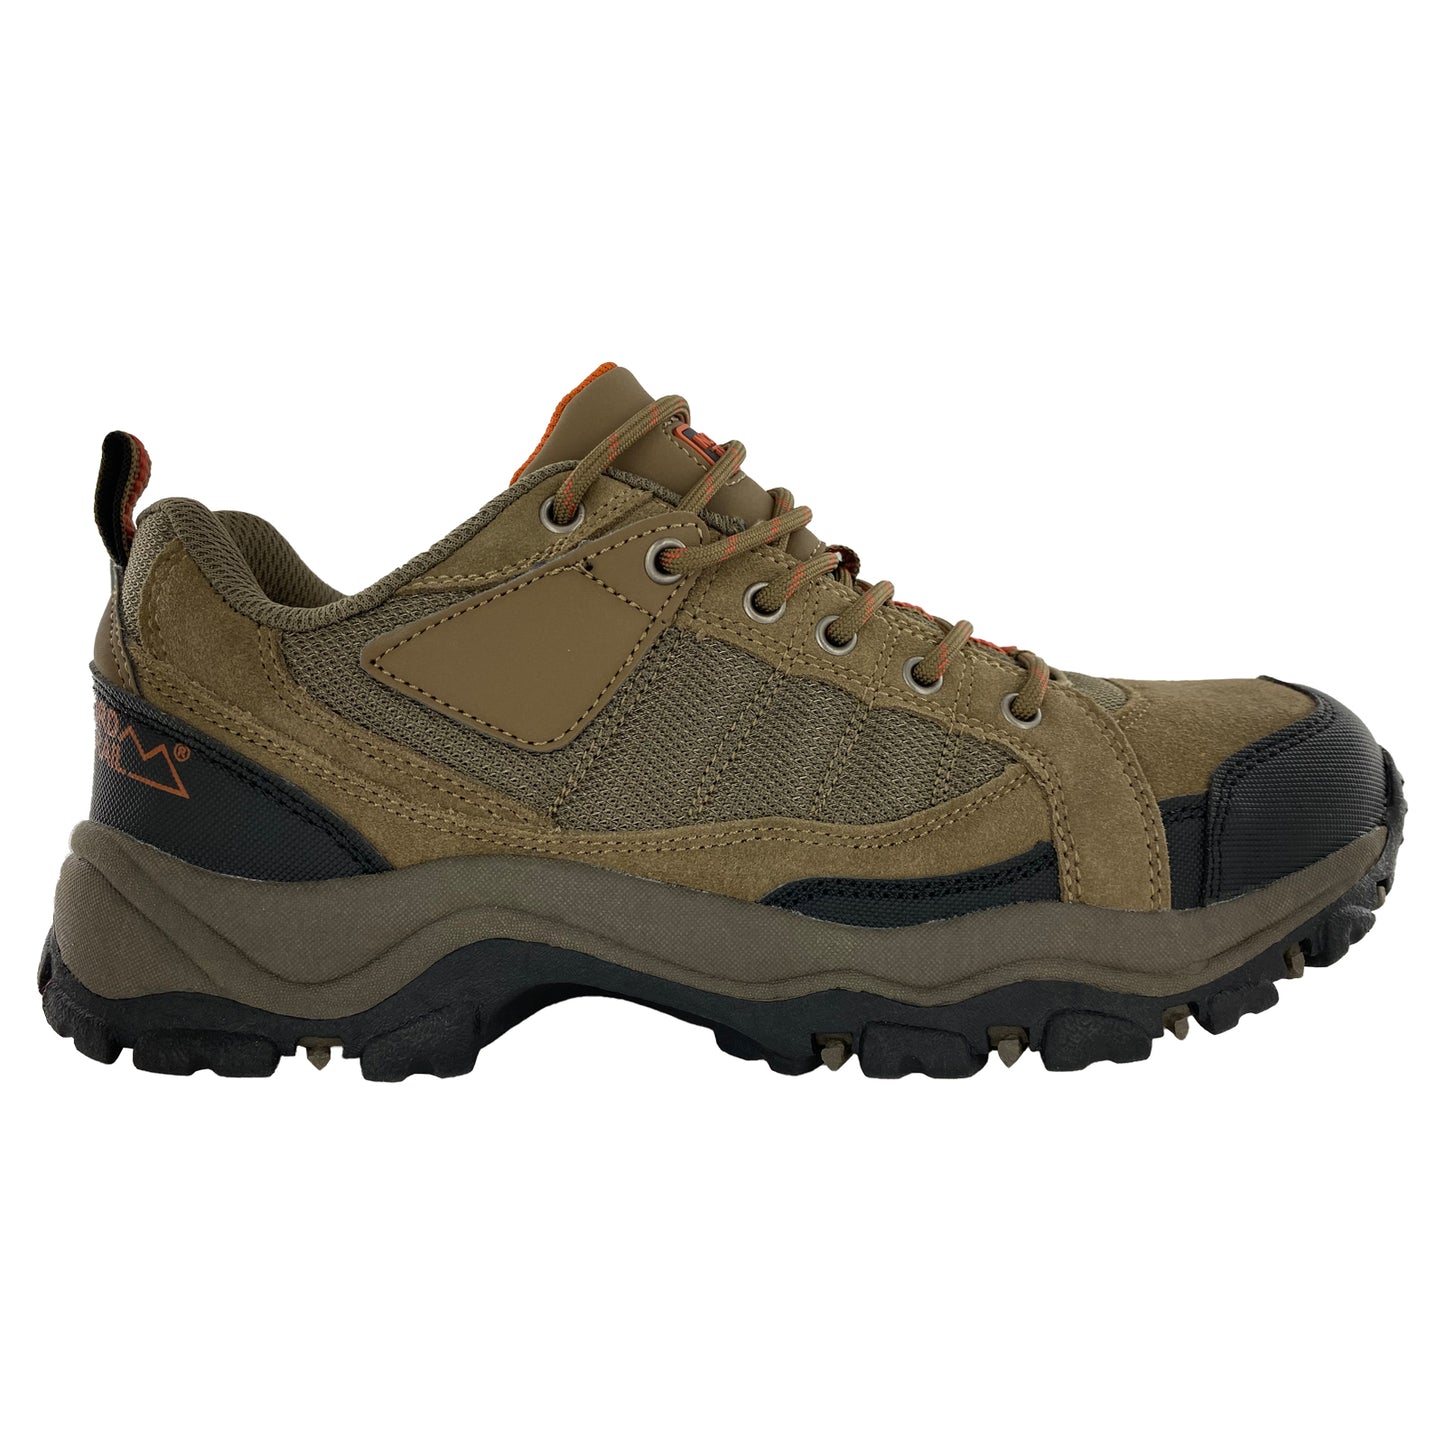 Nord Trail Men's Mt. Hunter II Taupe/Orange Leather Trail Hiking Casual Shoe